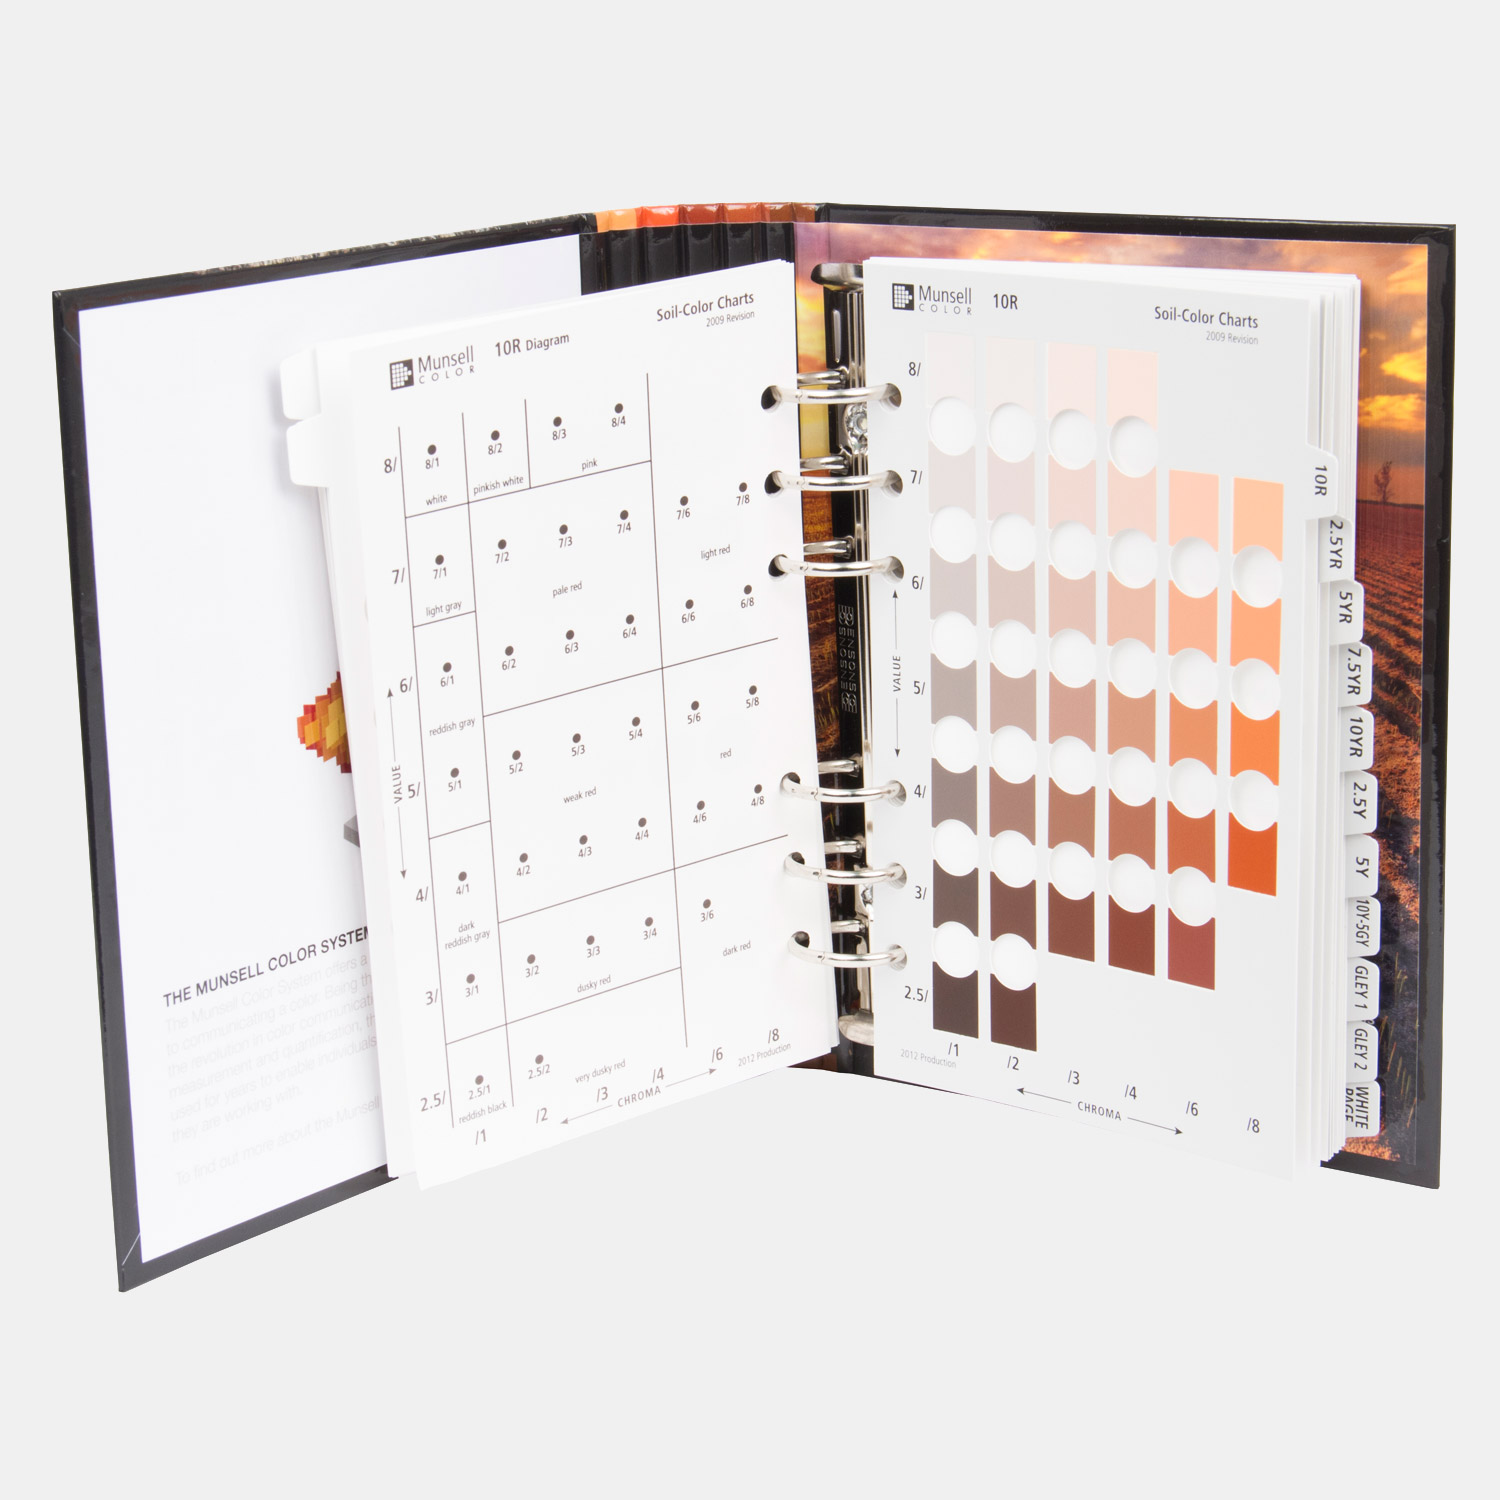 Munsell Soil Color Charts 2009 Rev